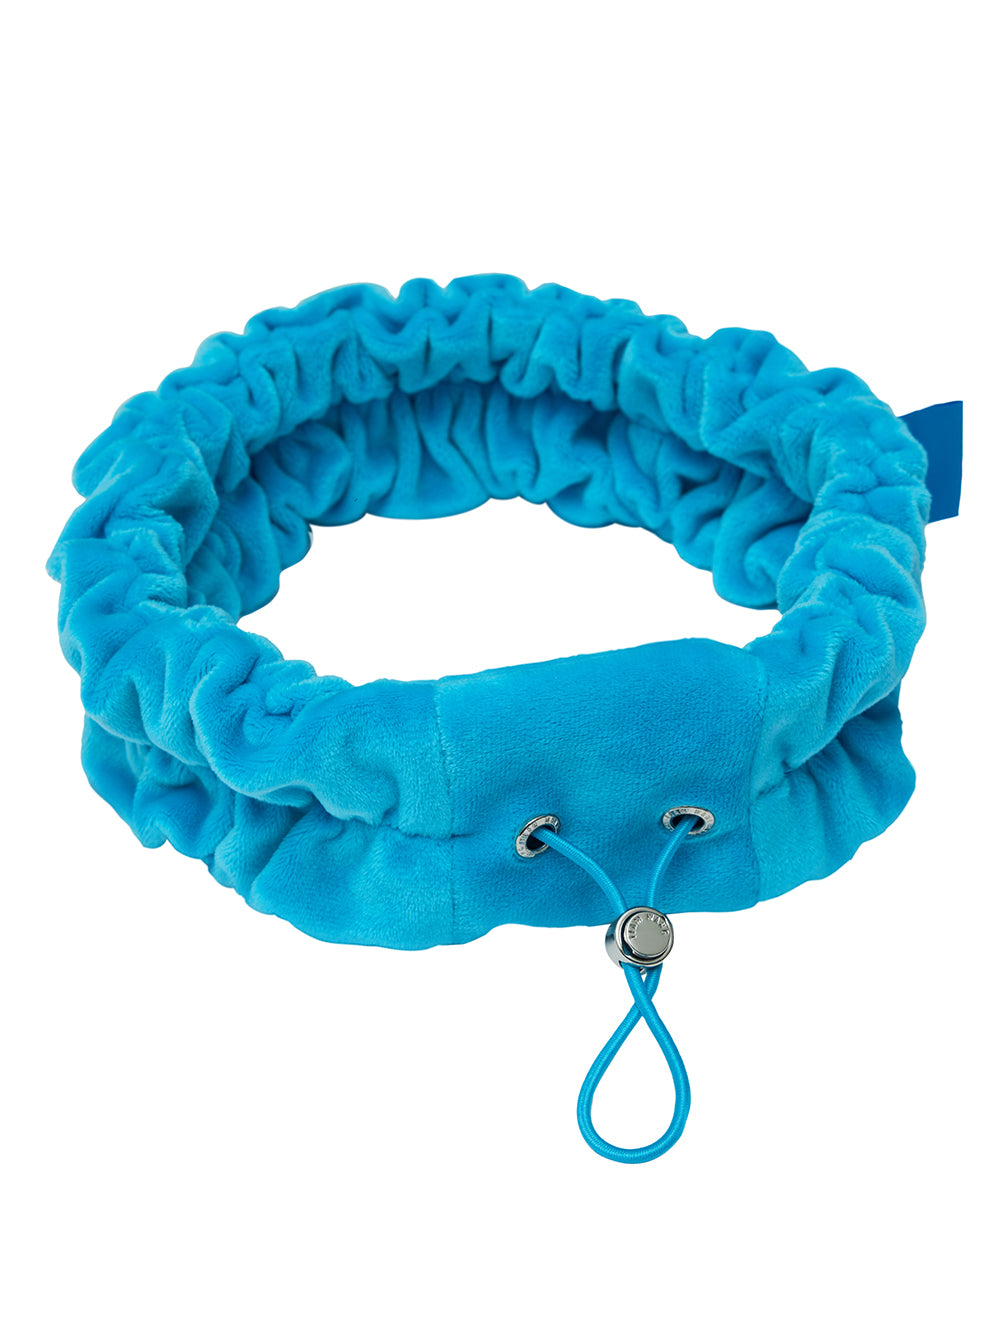 STAY FOR THE NIGHT SPA HEADBAND (BLUE)